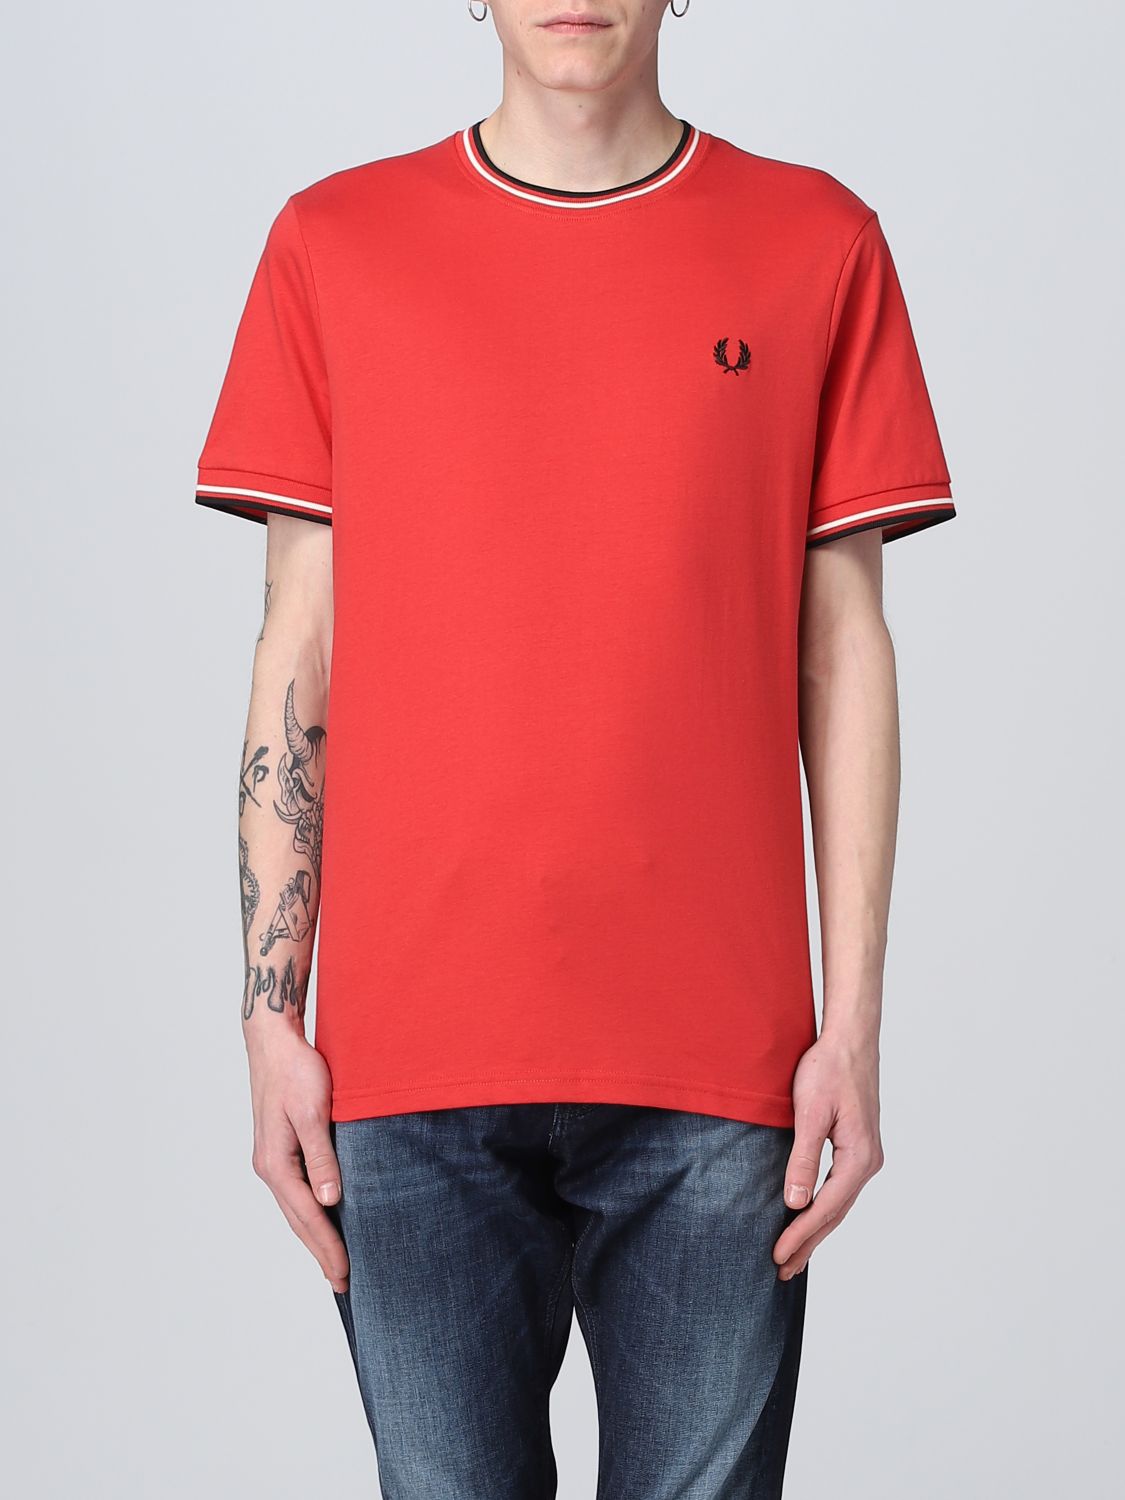 FRED PERRY: t-shirt for man - Red | Fred Perry t-shirt M1588 online on ...